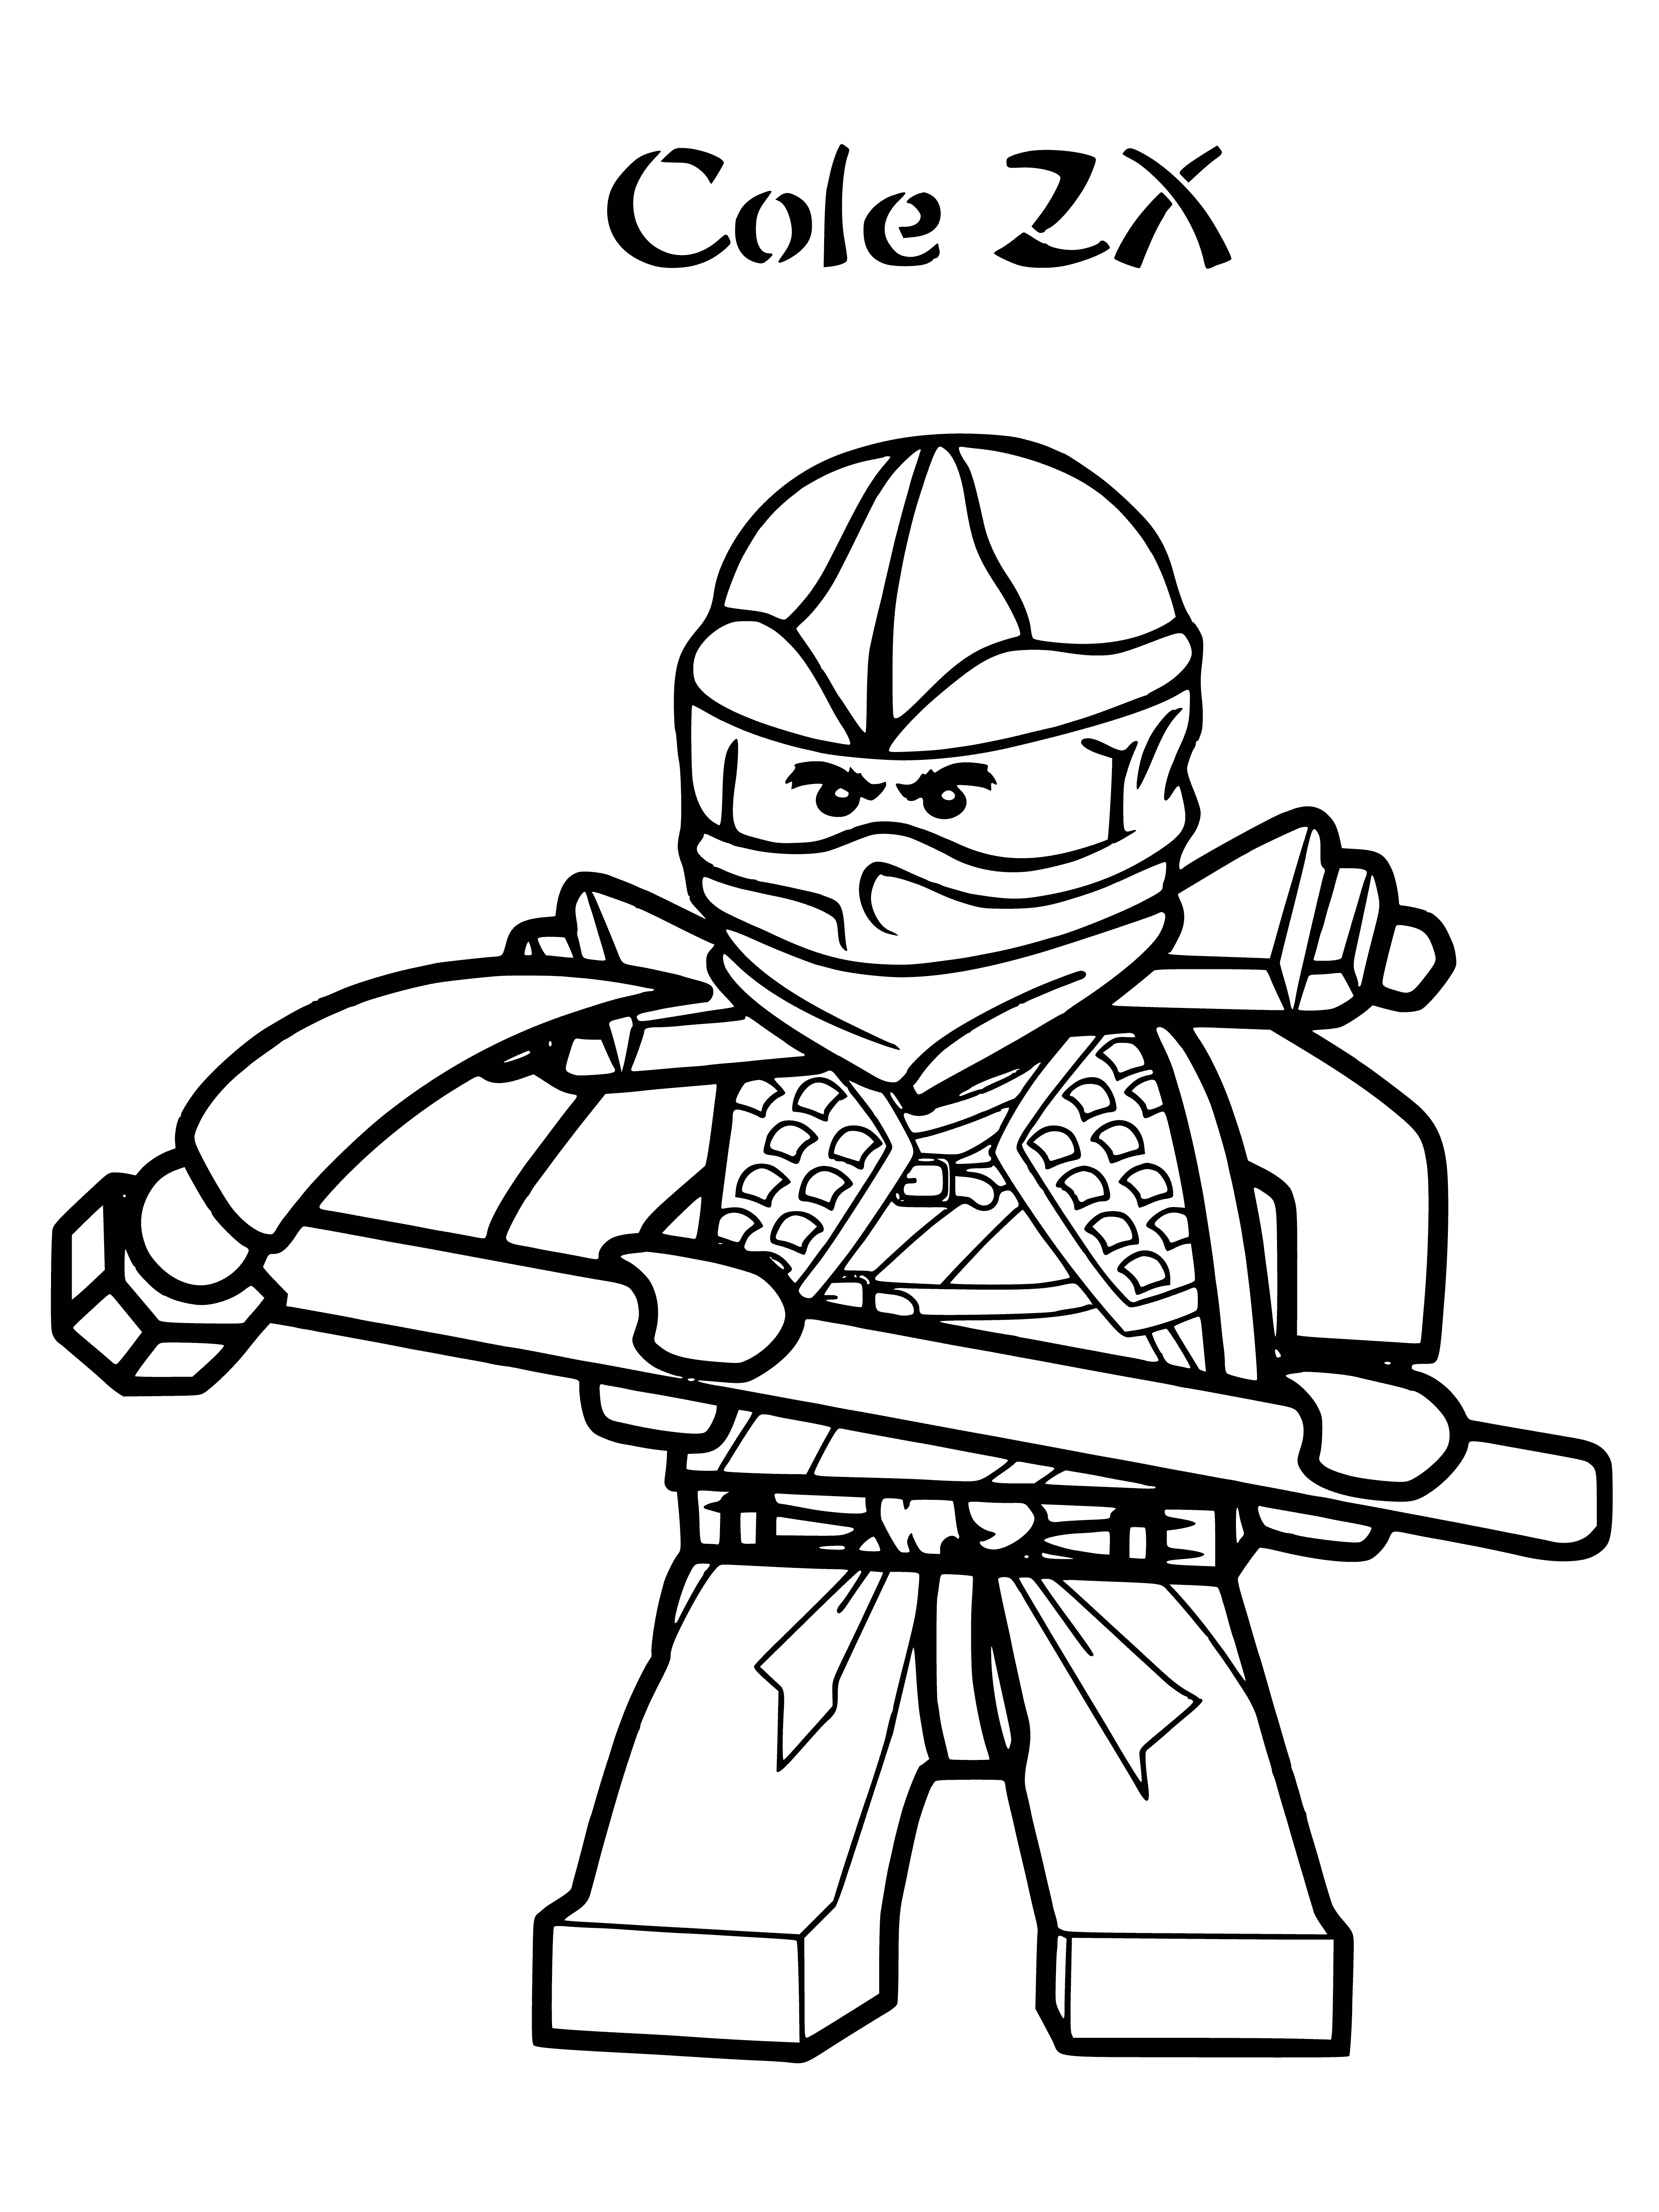 coloring page: Cole, a LEGO Ninjago character, stands in center with black & gray attire, a yellow headband and a sword. Behind him is a LEGO bldg and a small dragon.